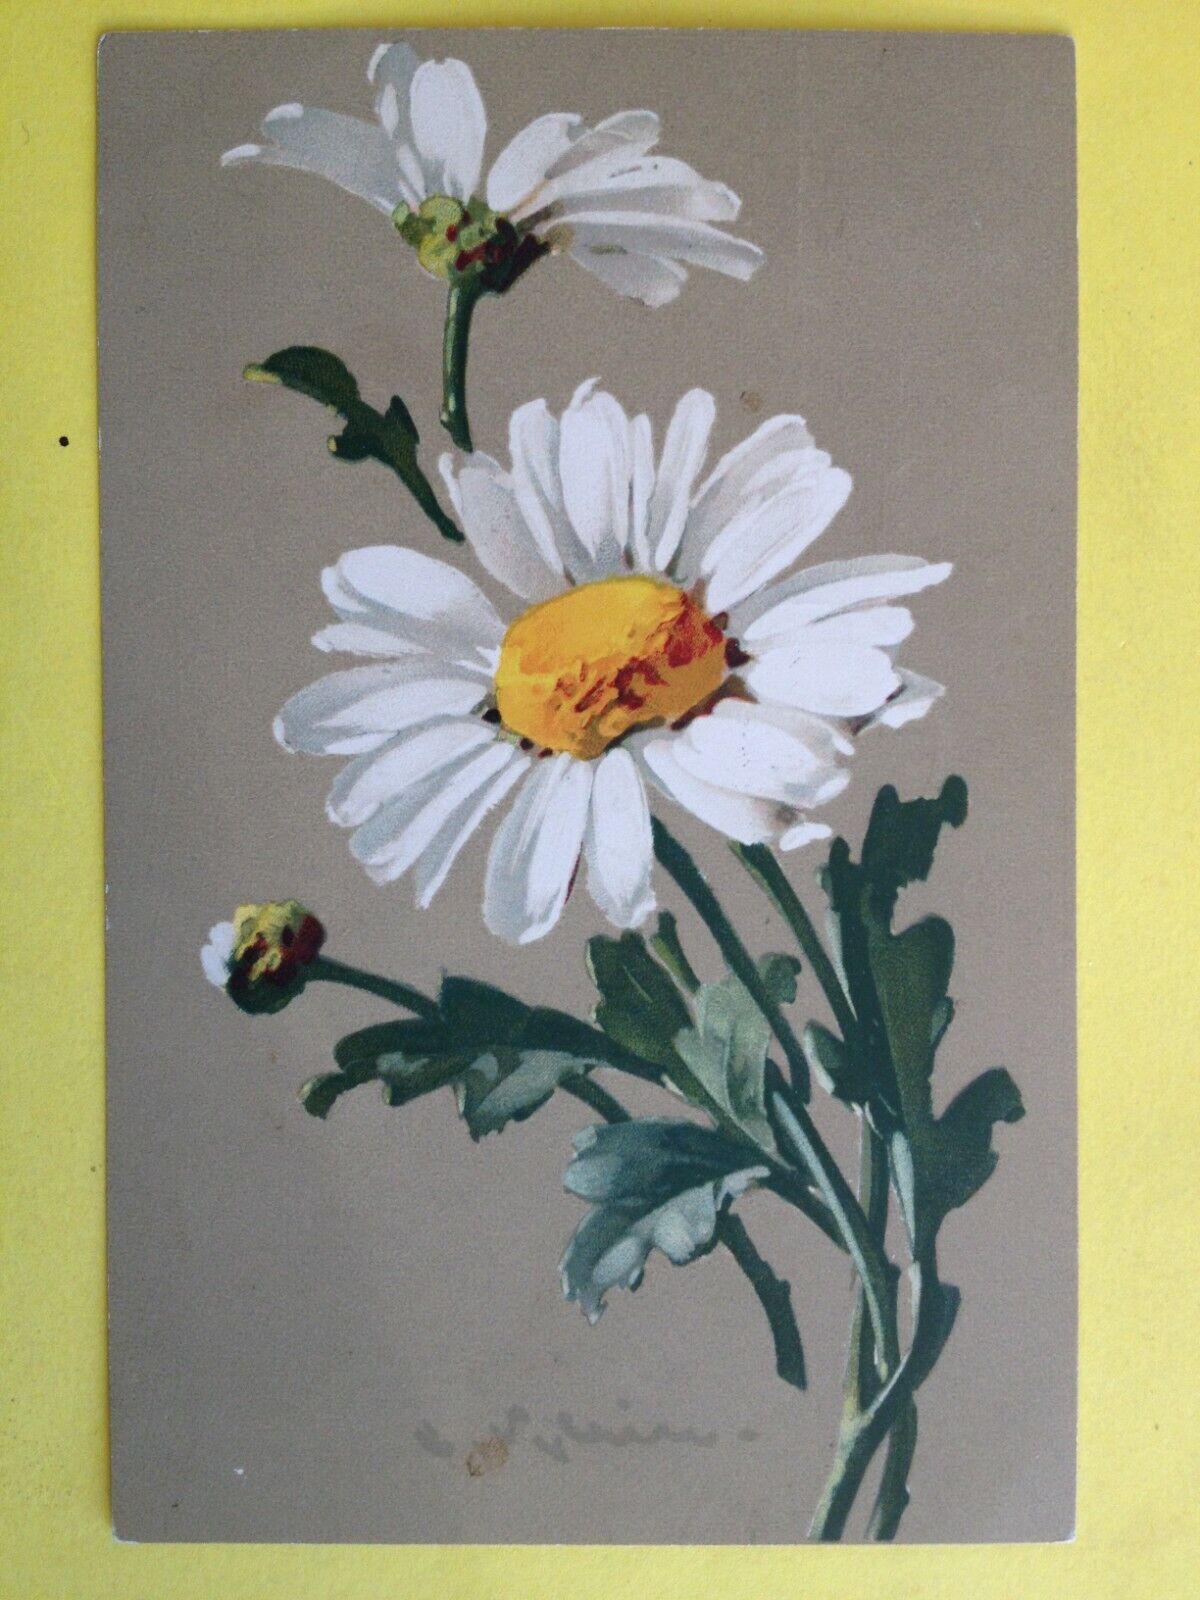 cpa Meissner & book WATERCOLOR DRAWING signed Catharina KLEIN Flowers Marguerite